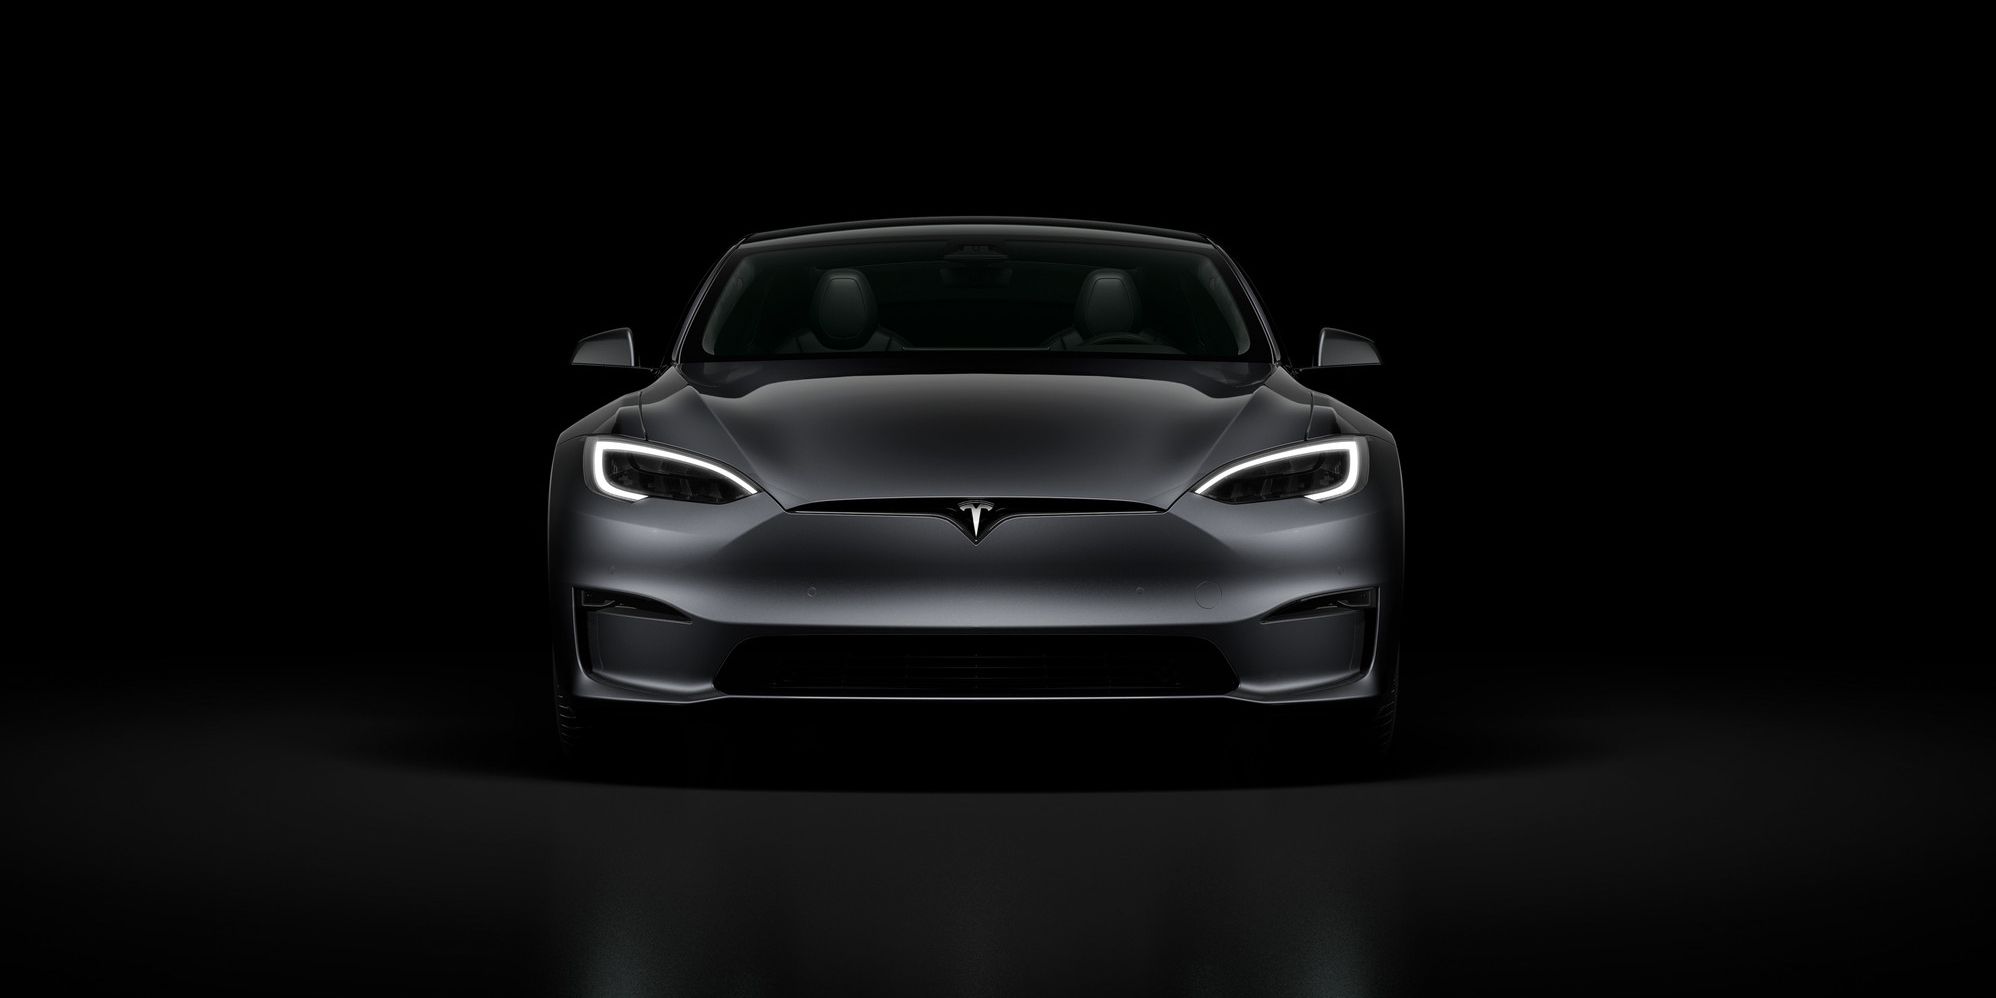 The front of a gray Tesla Model S